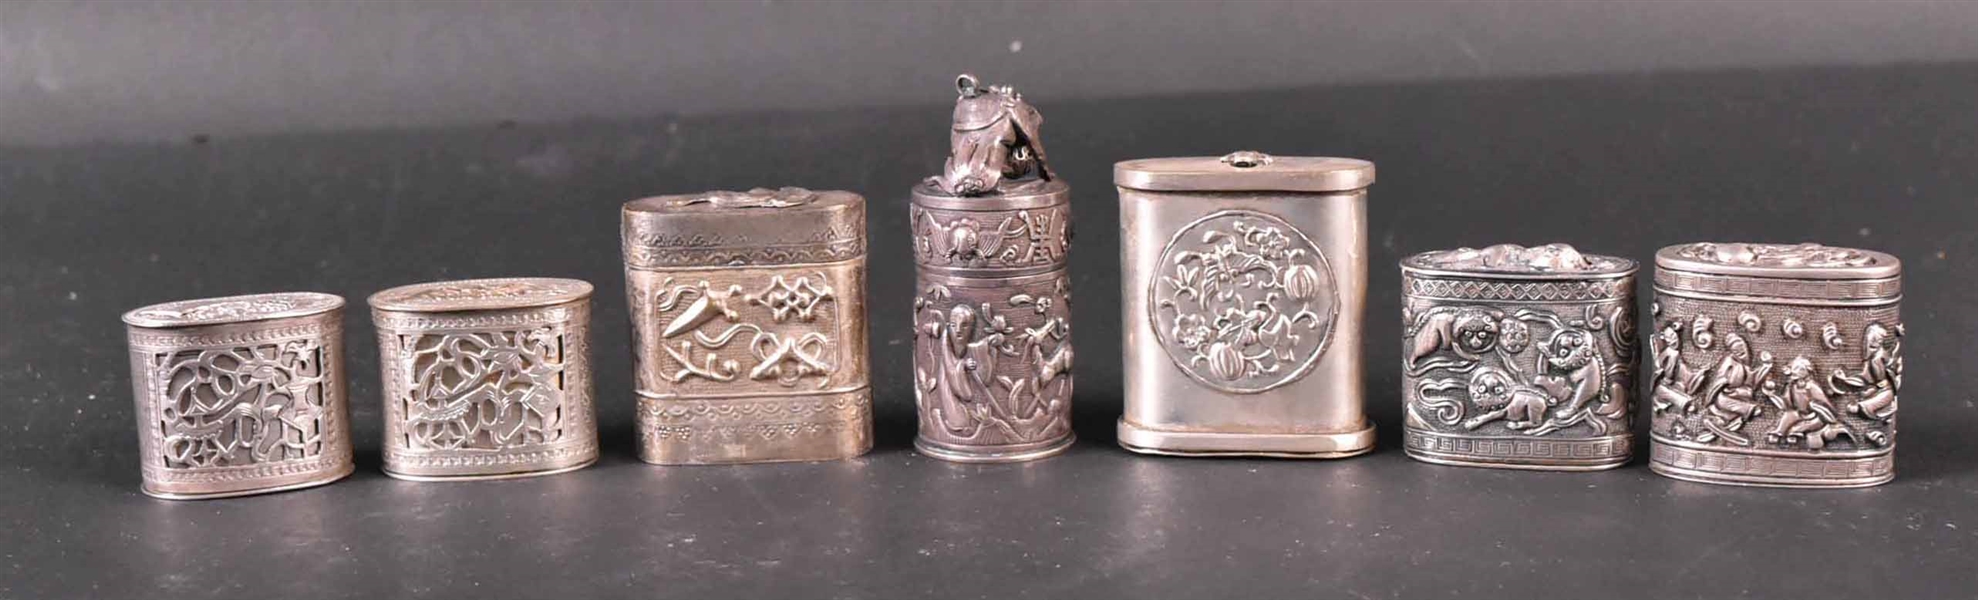 Seven Chinese Export Silver Opium Containers